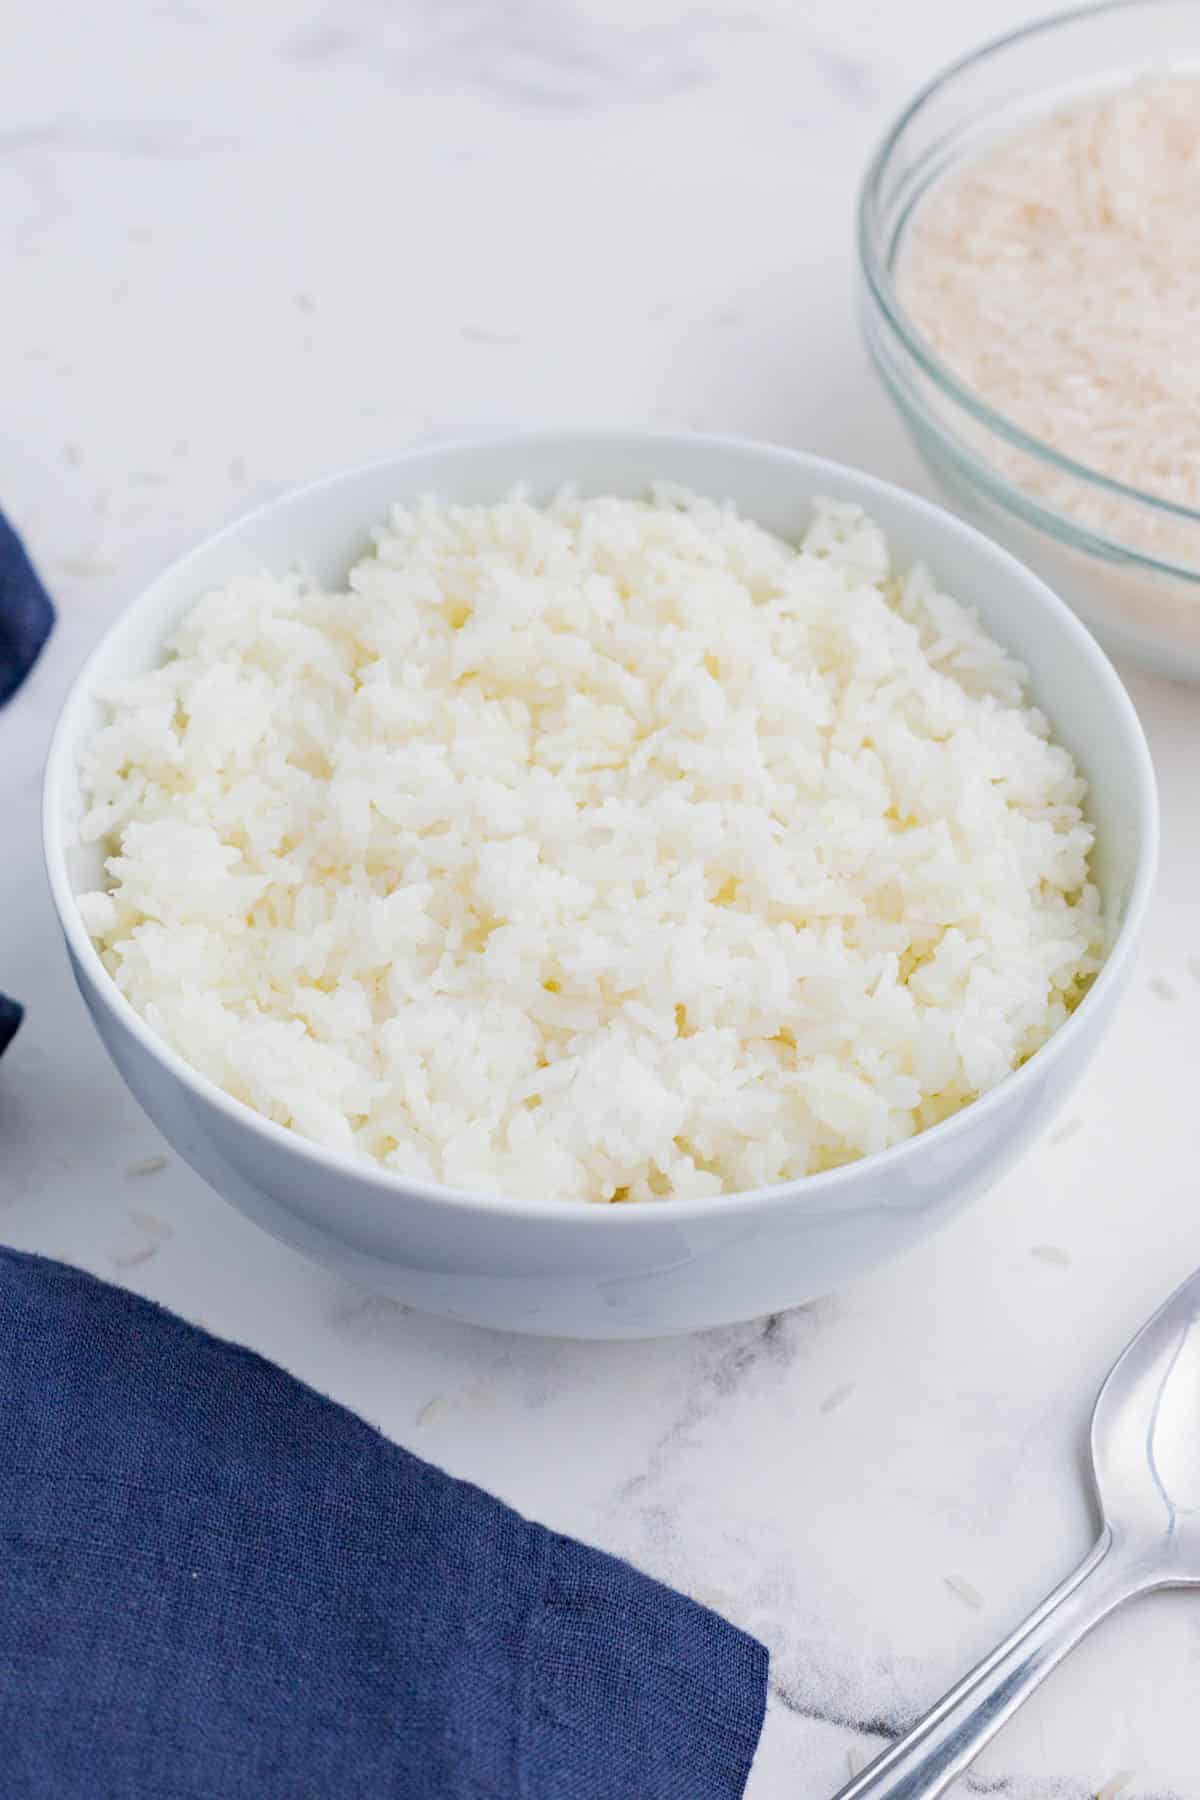 Cooked rice is served in a white bowl as an easy side dish.